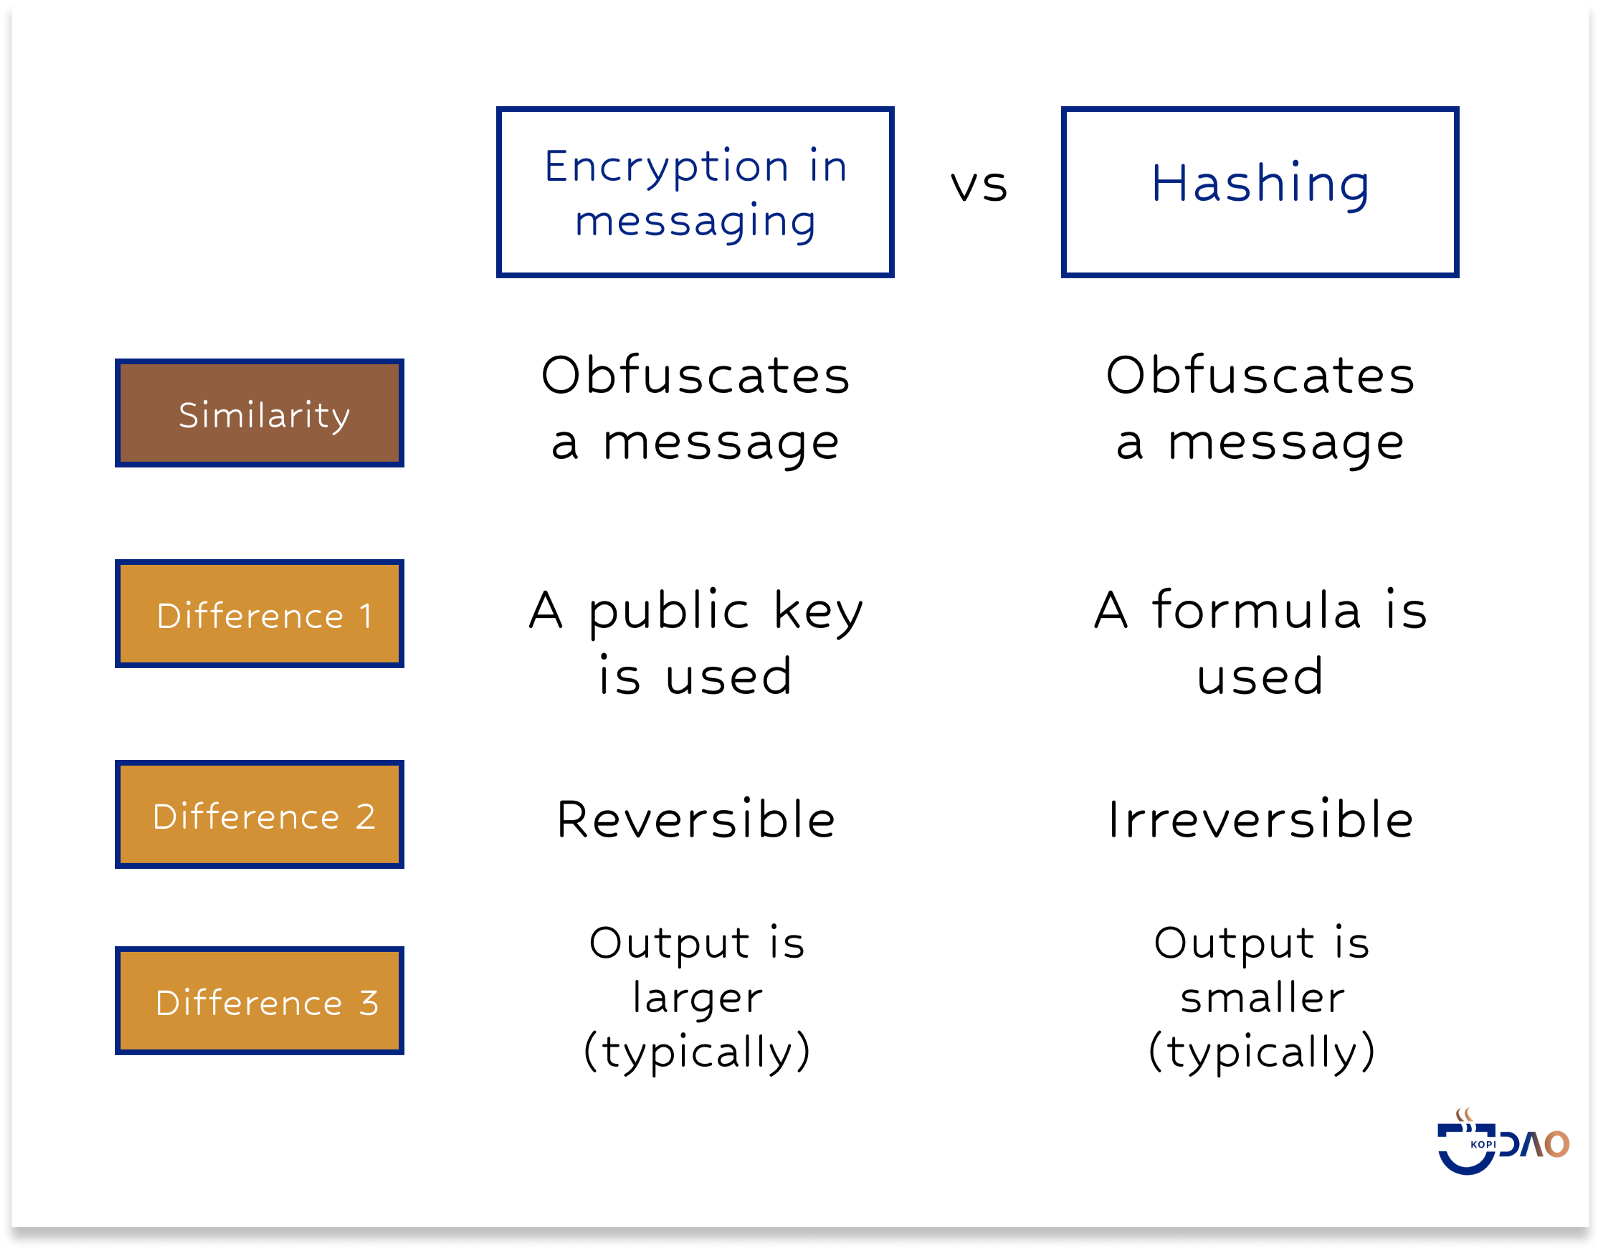 Encryption and Hashing compared: While they have one similarity, they differ in 3 ways.